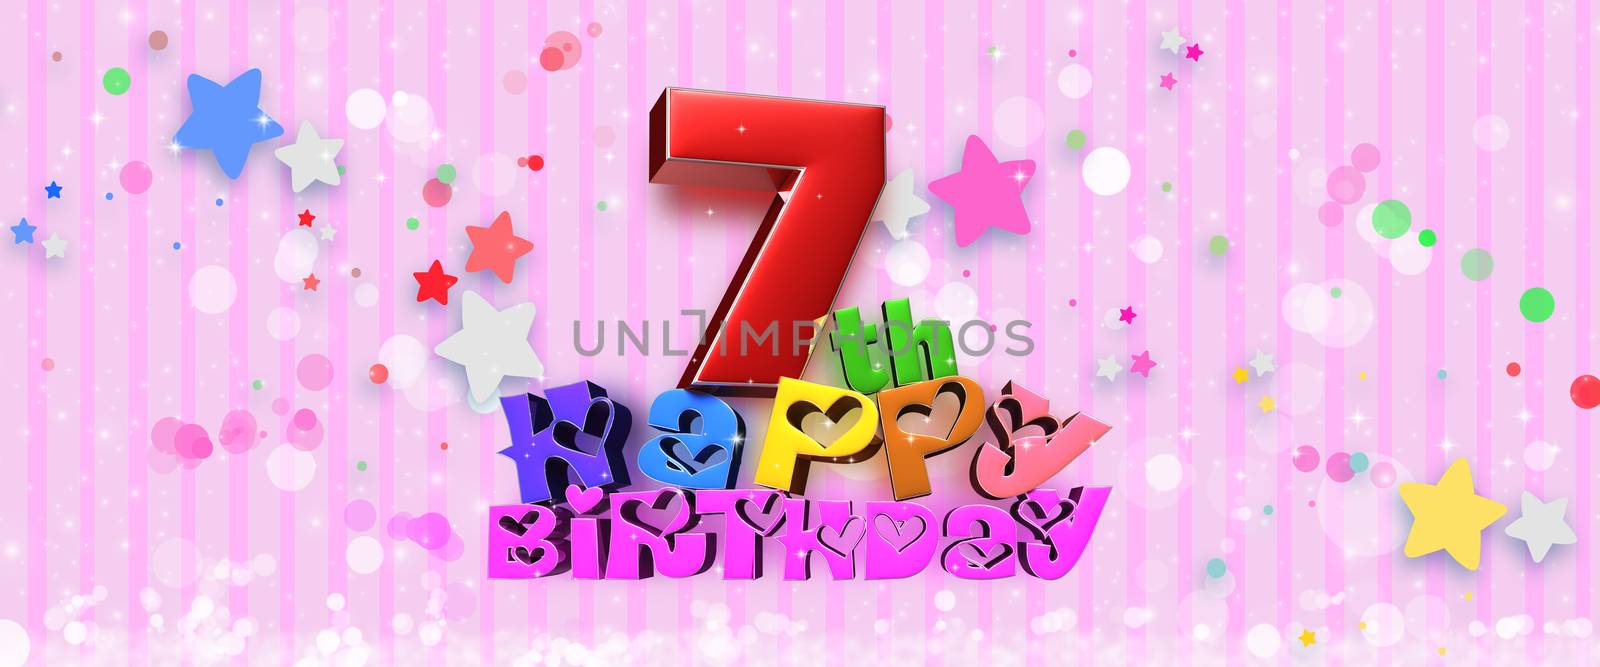 Anniversary Happy Birthday 7 th colorful 3d illustration on pink background.